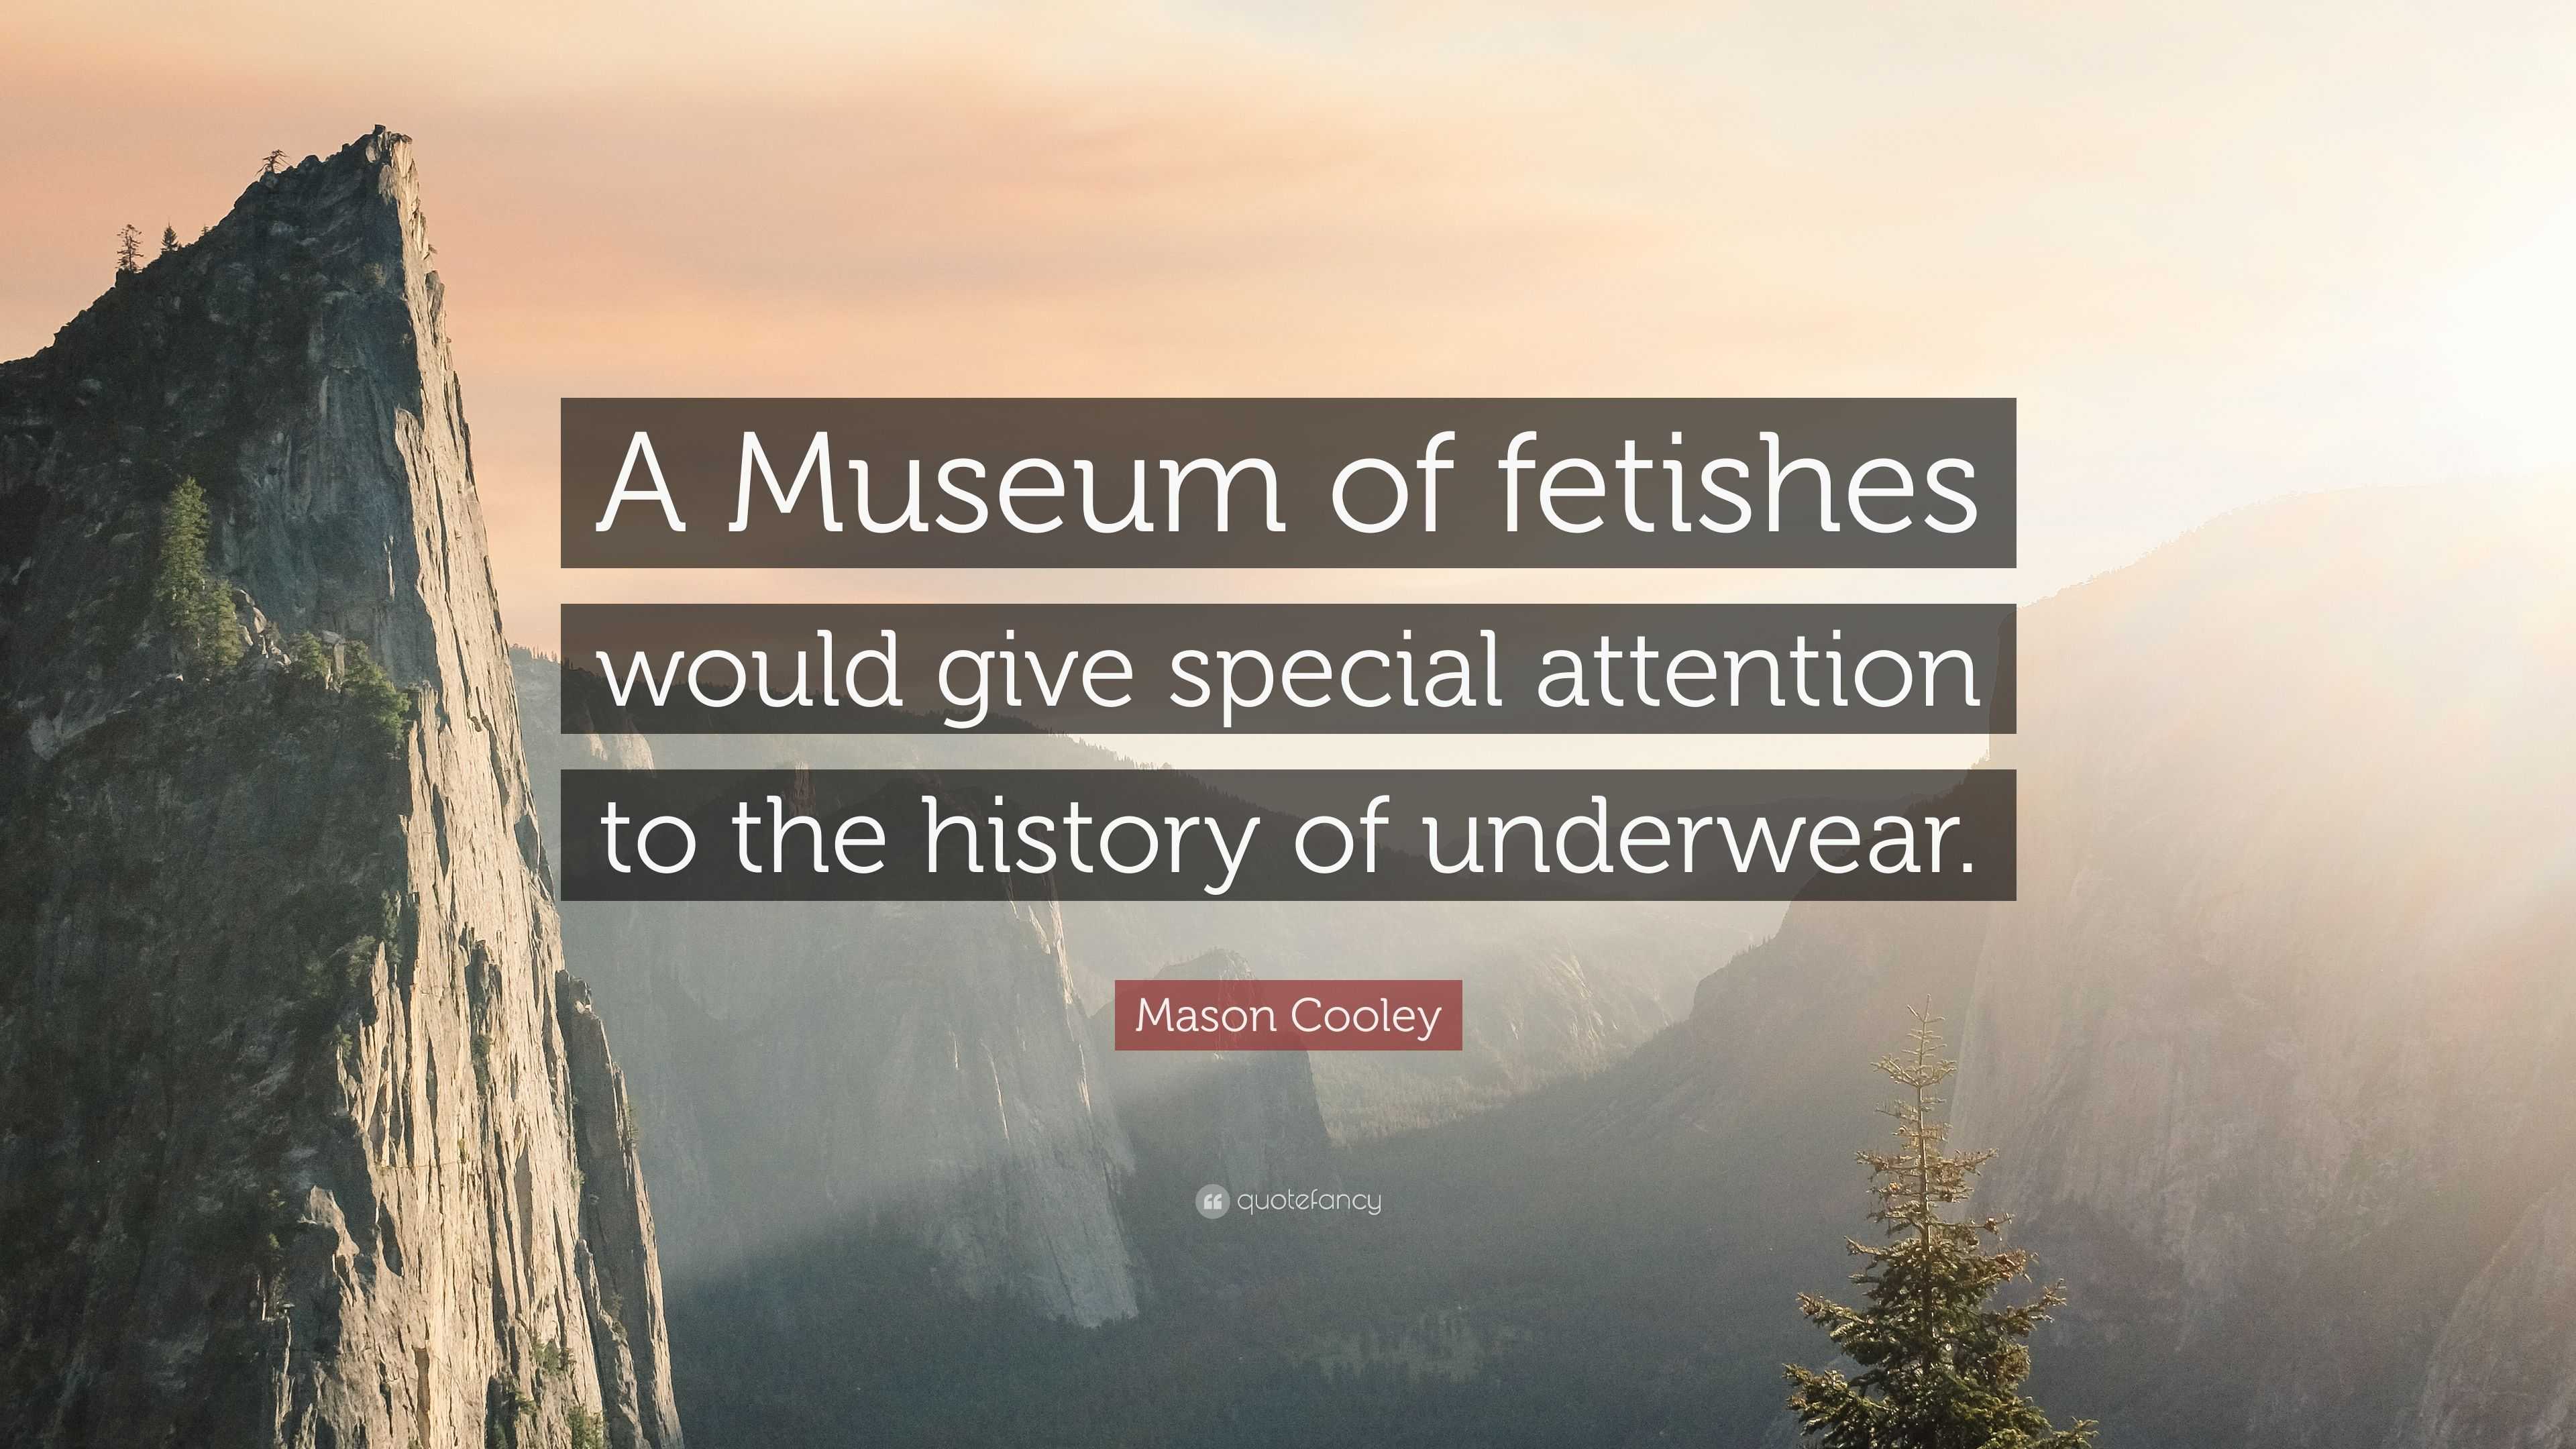 Mason Cooley Quote: “A Museum of fetishes would give special